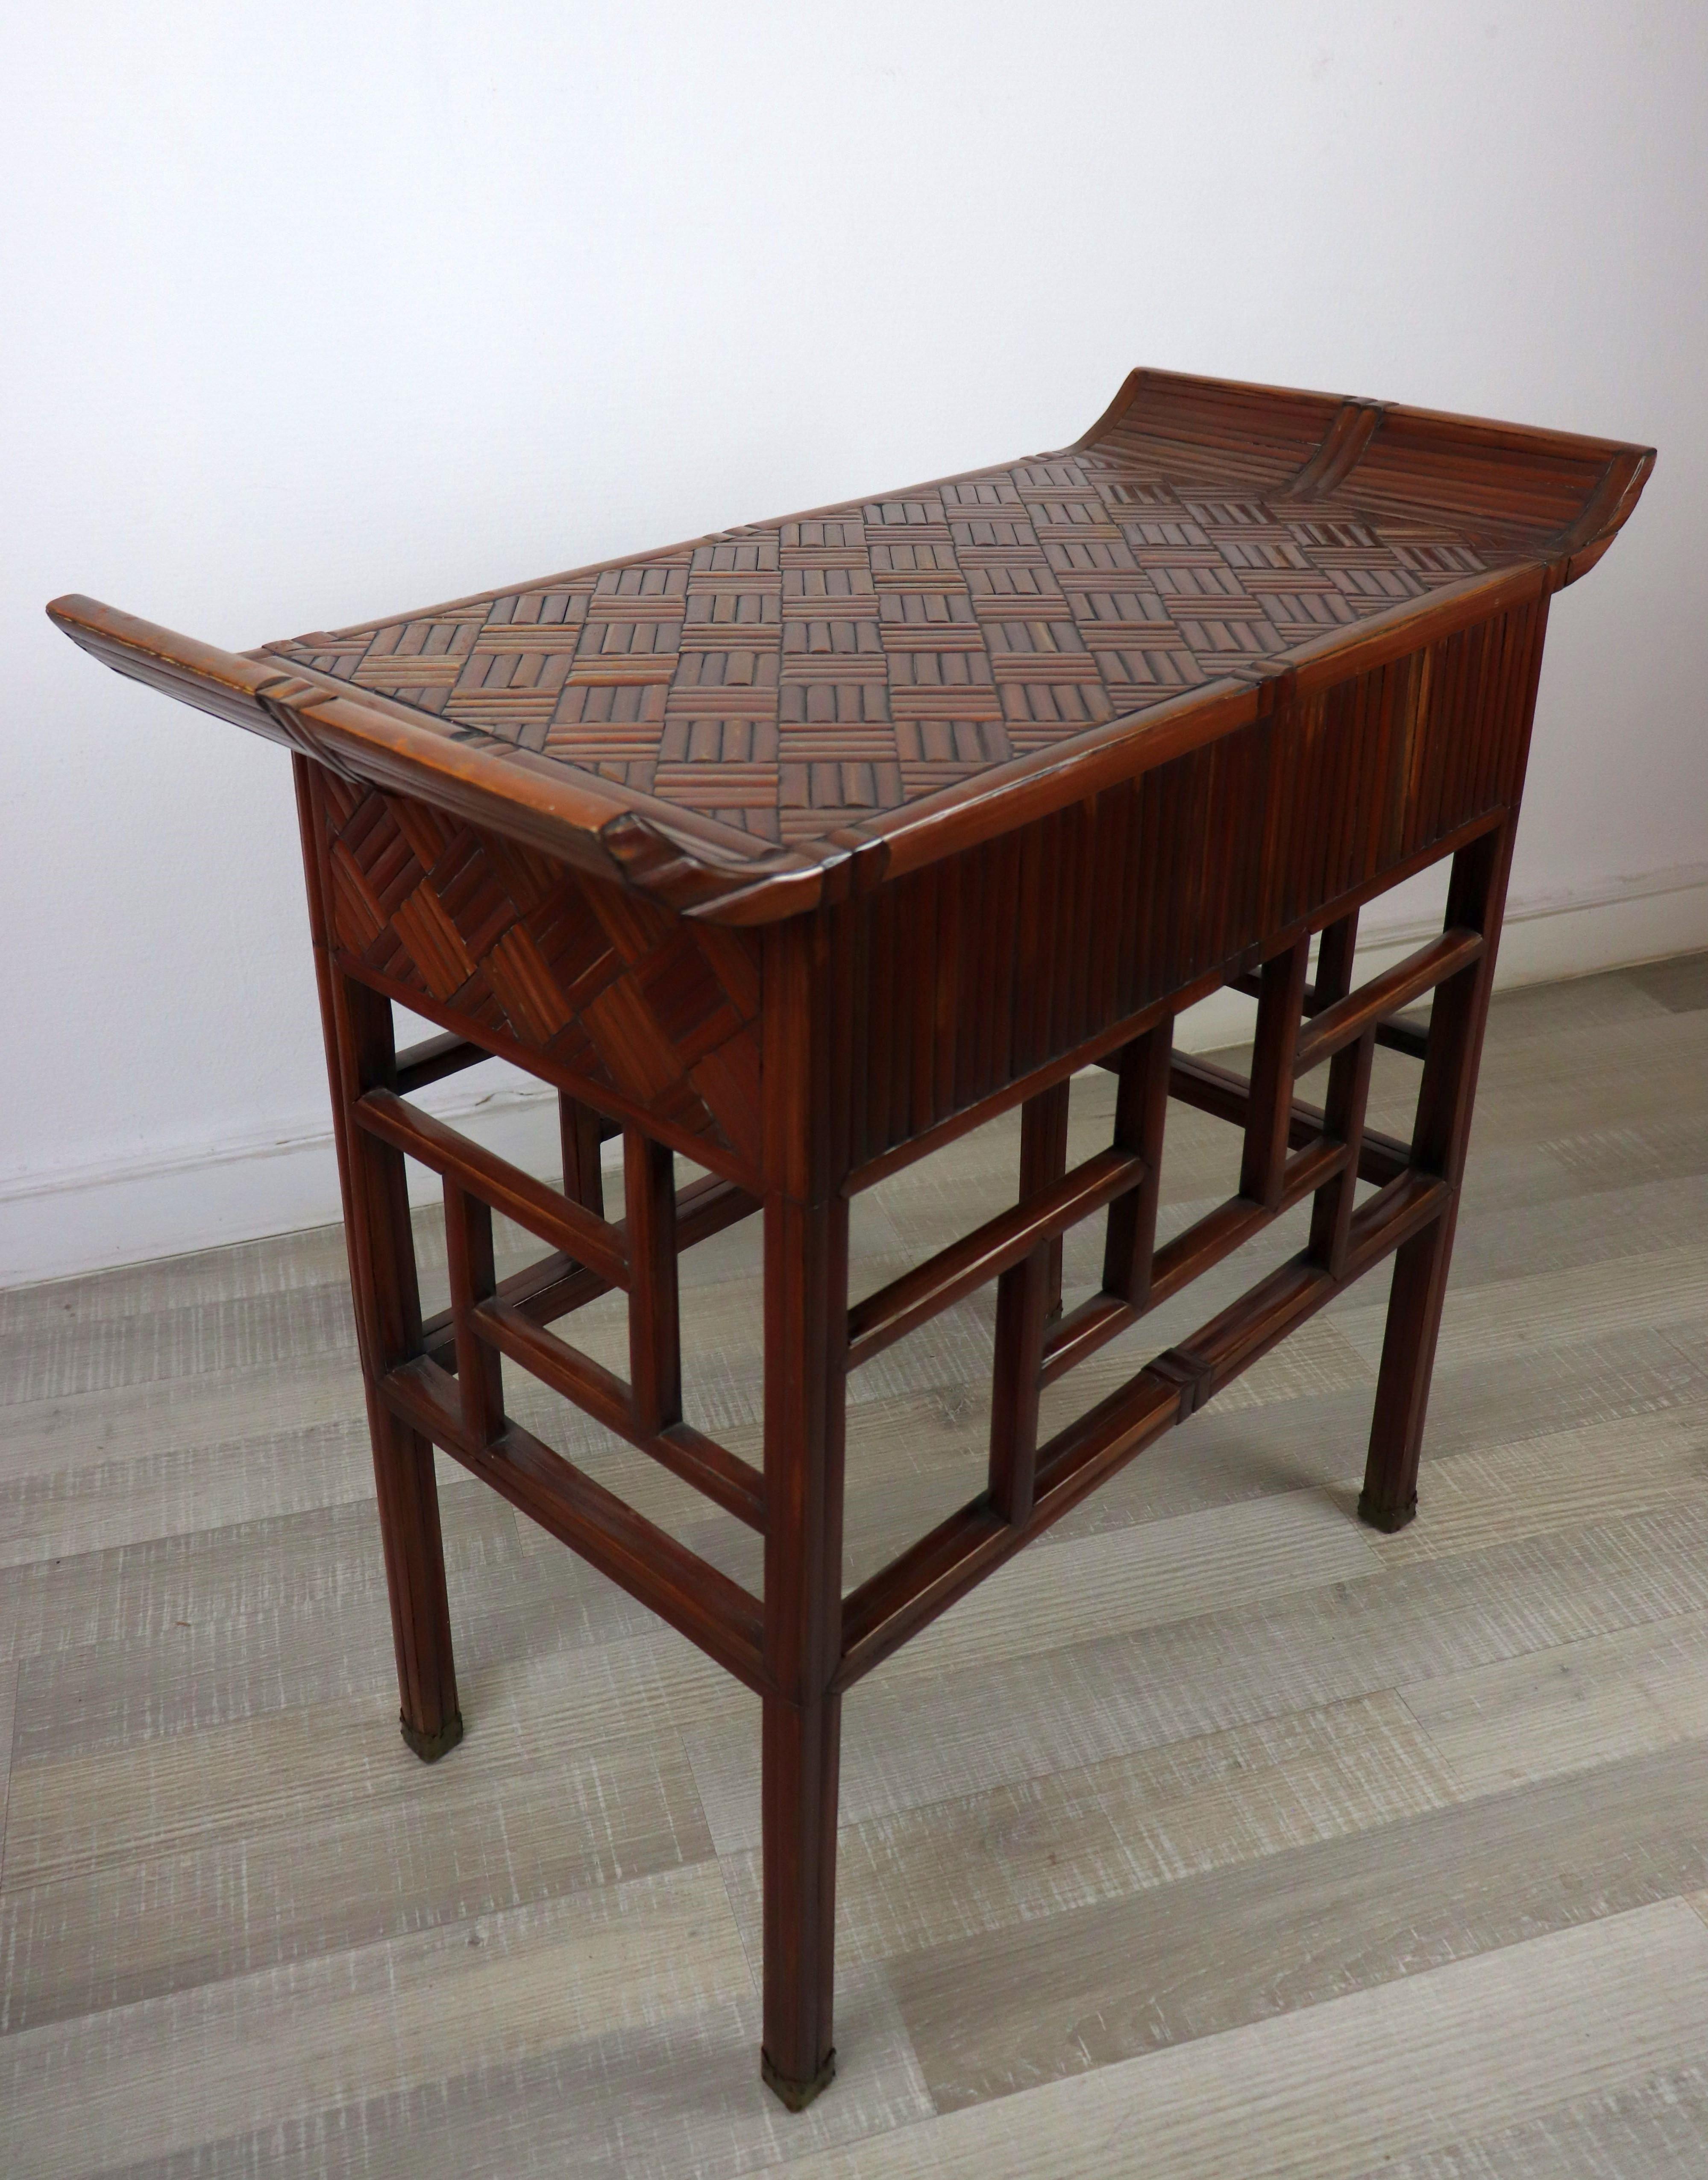 19th Century Chineese Bamboo Table